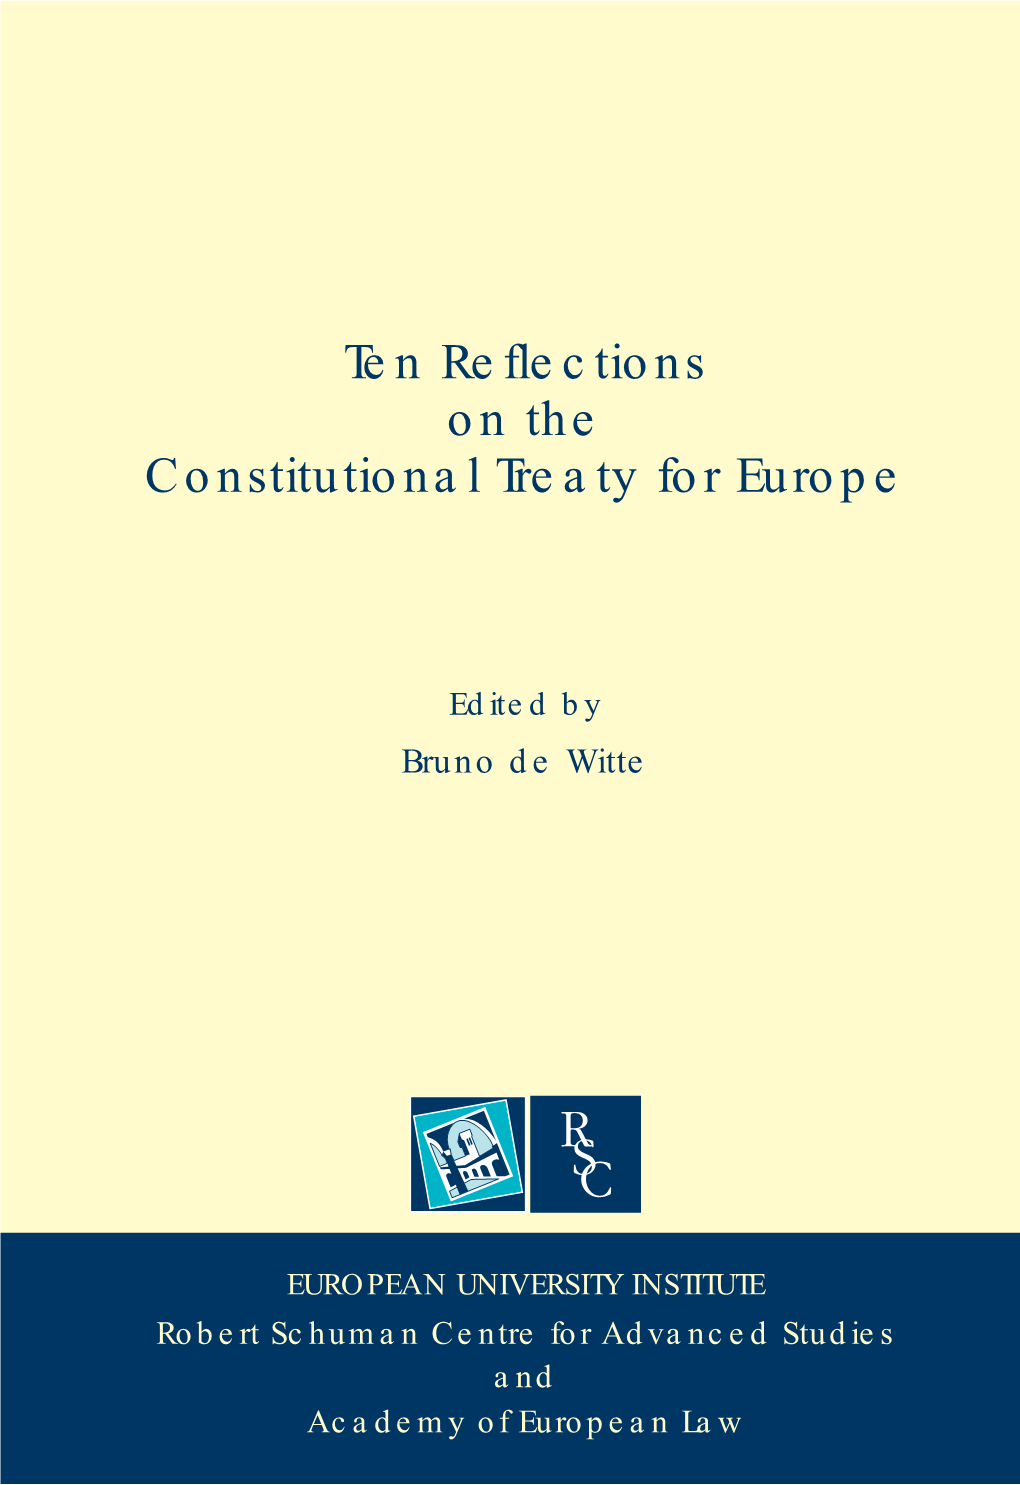 Ten Reflections on the Constitutional Treaty for Europe